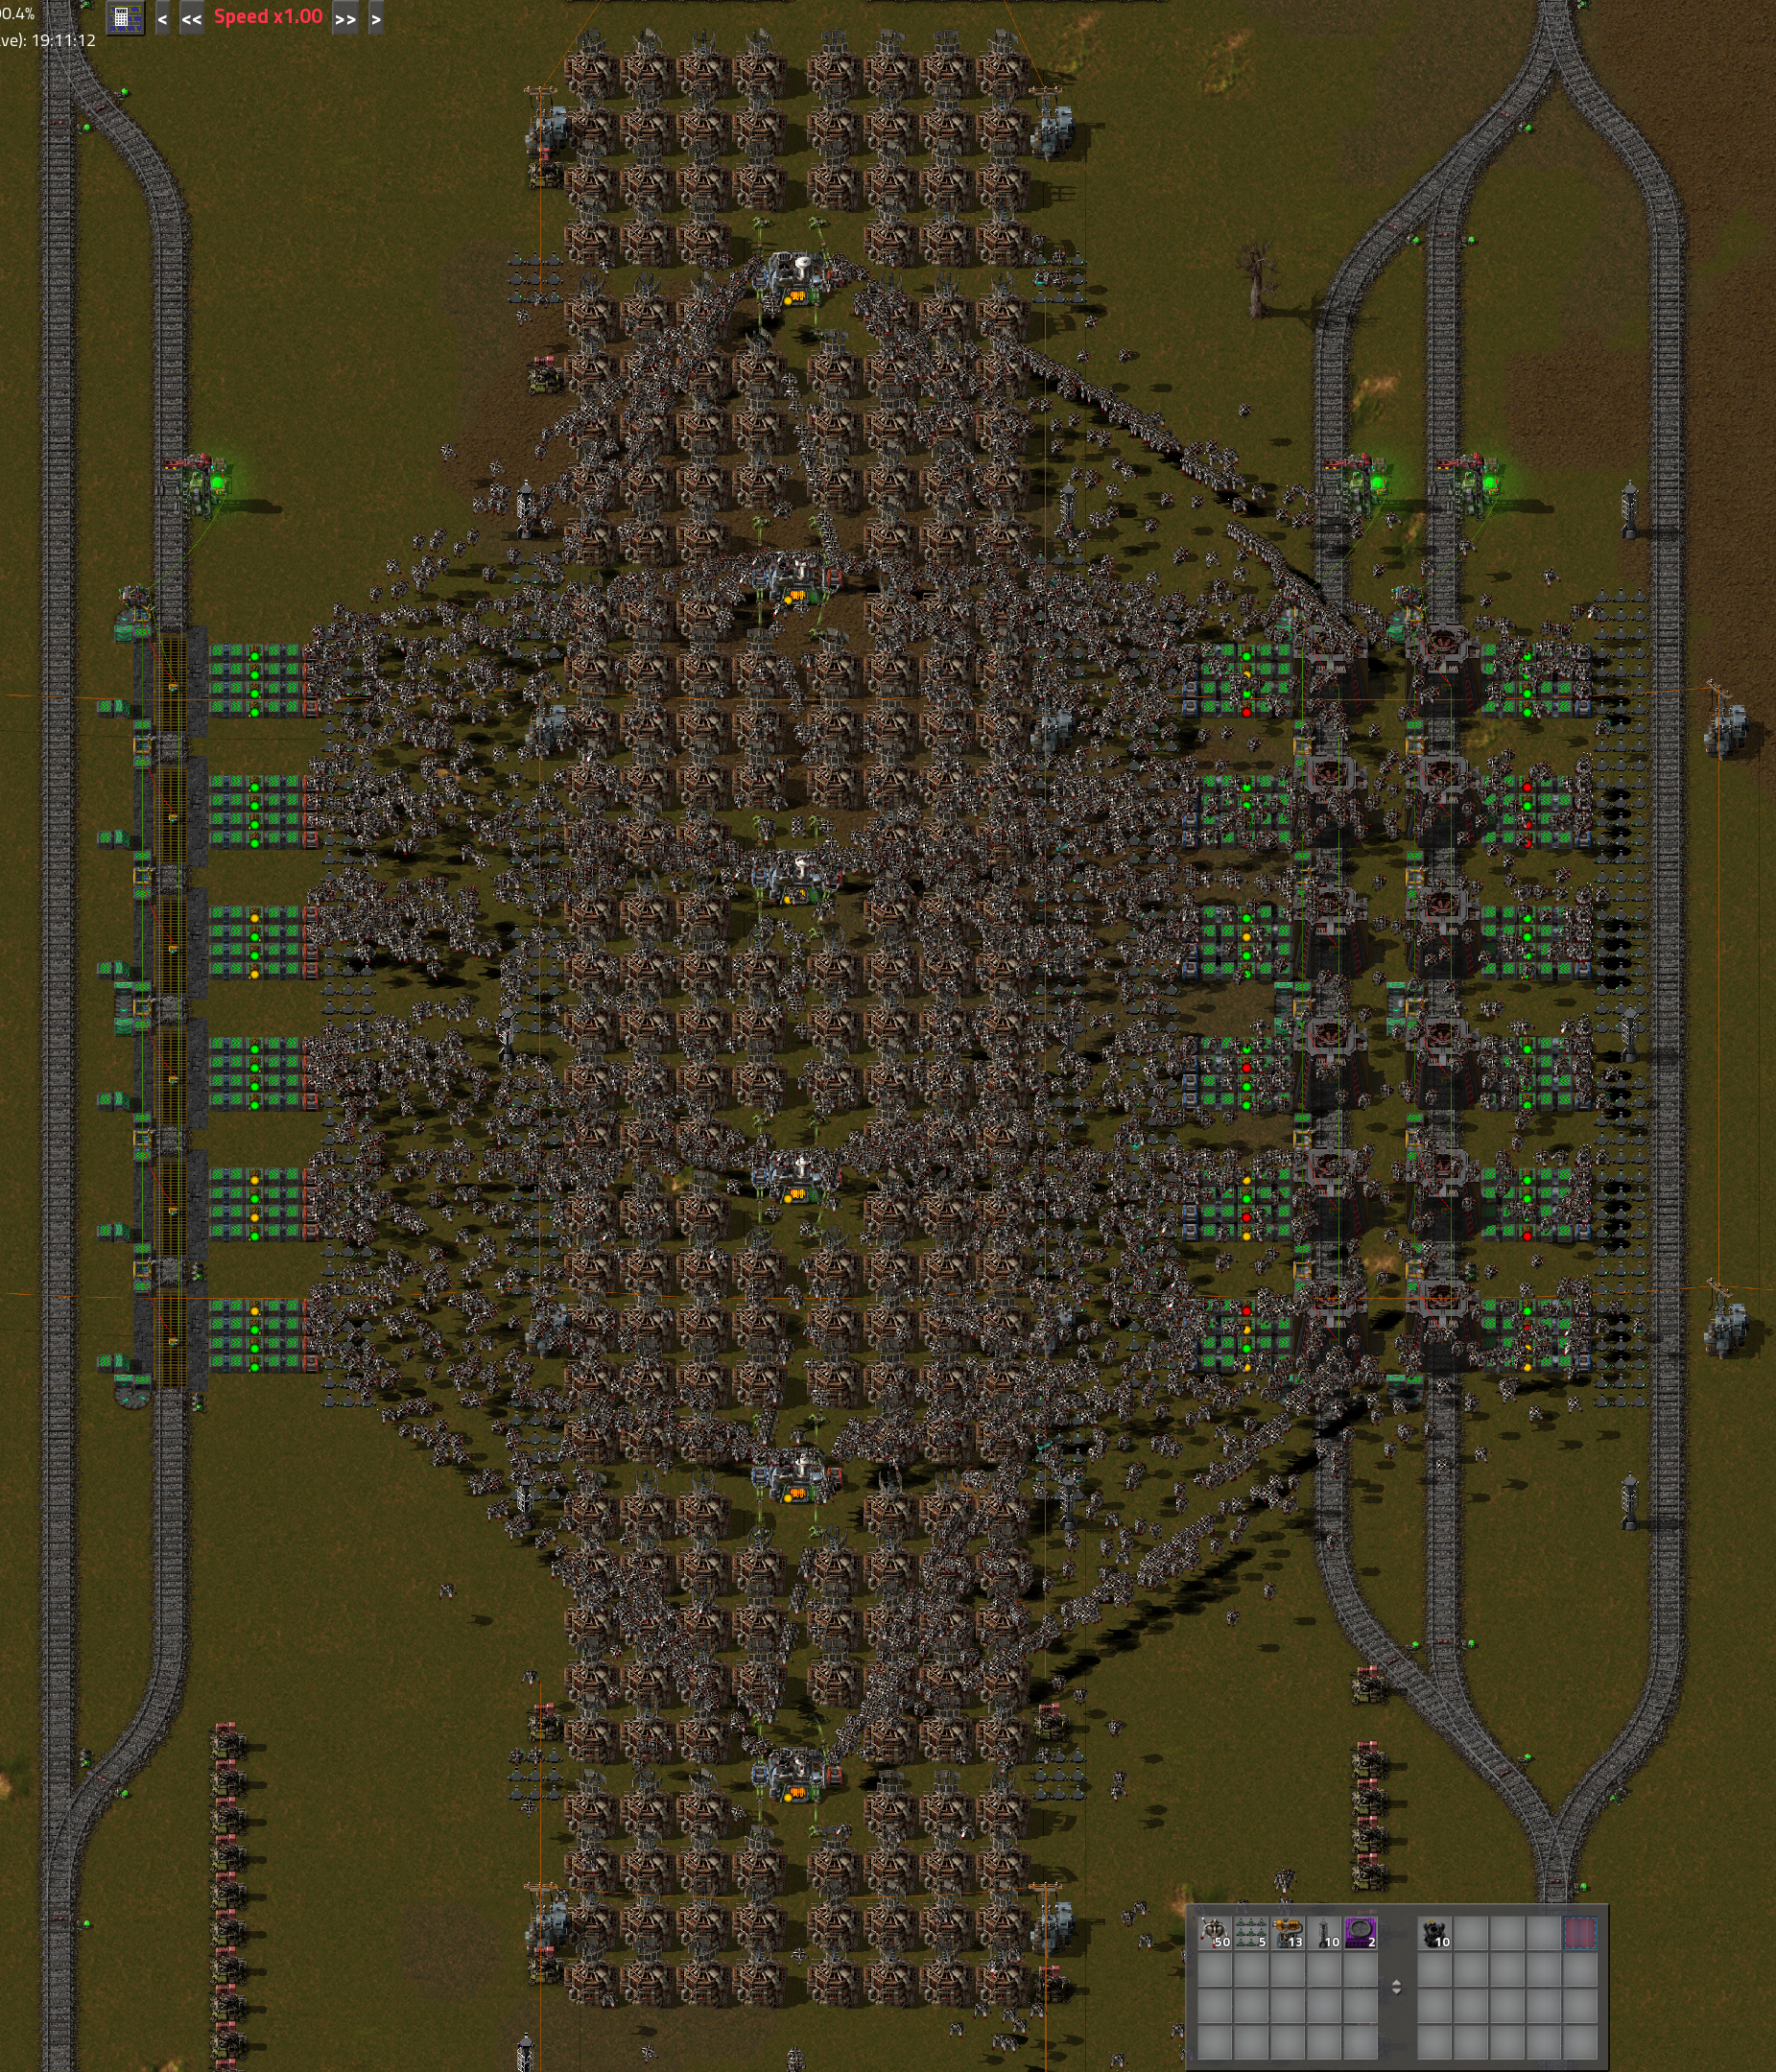 Smelter with bots mk1